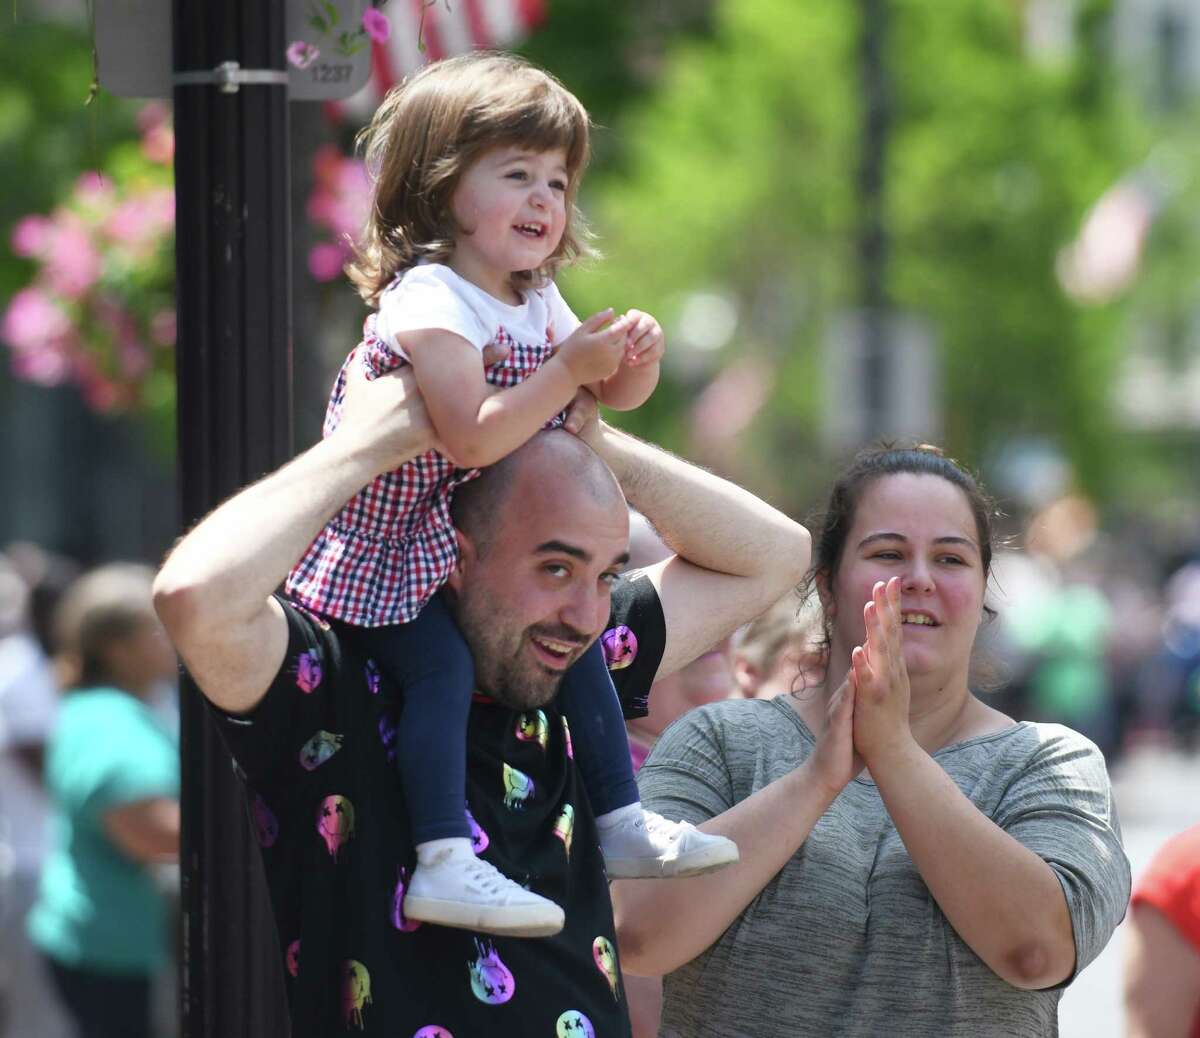 Stamford's Alex and Angelia Labrosciano and their daughter, Skylar, 2, cheer during the 2022 Stamford Memorial Day Parade in Stamford, Conn. Sunday, May 29, 2022. The parade went from the Stamford Police Department to Veteran's Park, where a ceremony was held to honor and remember those who died in war. The ceremony sepcifically honored this year's grand marshal, U.S. Army Cpl. James Lyles, as well as Gold Star Families in attendance.